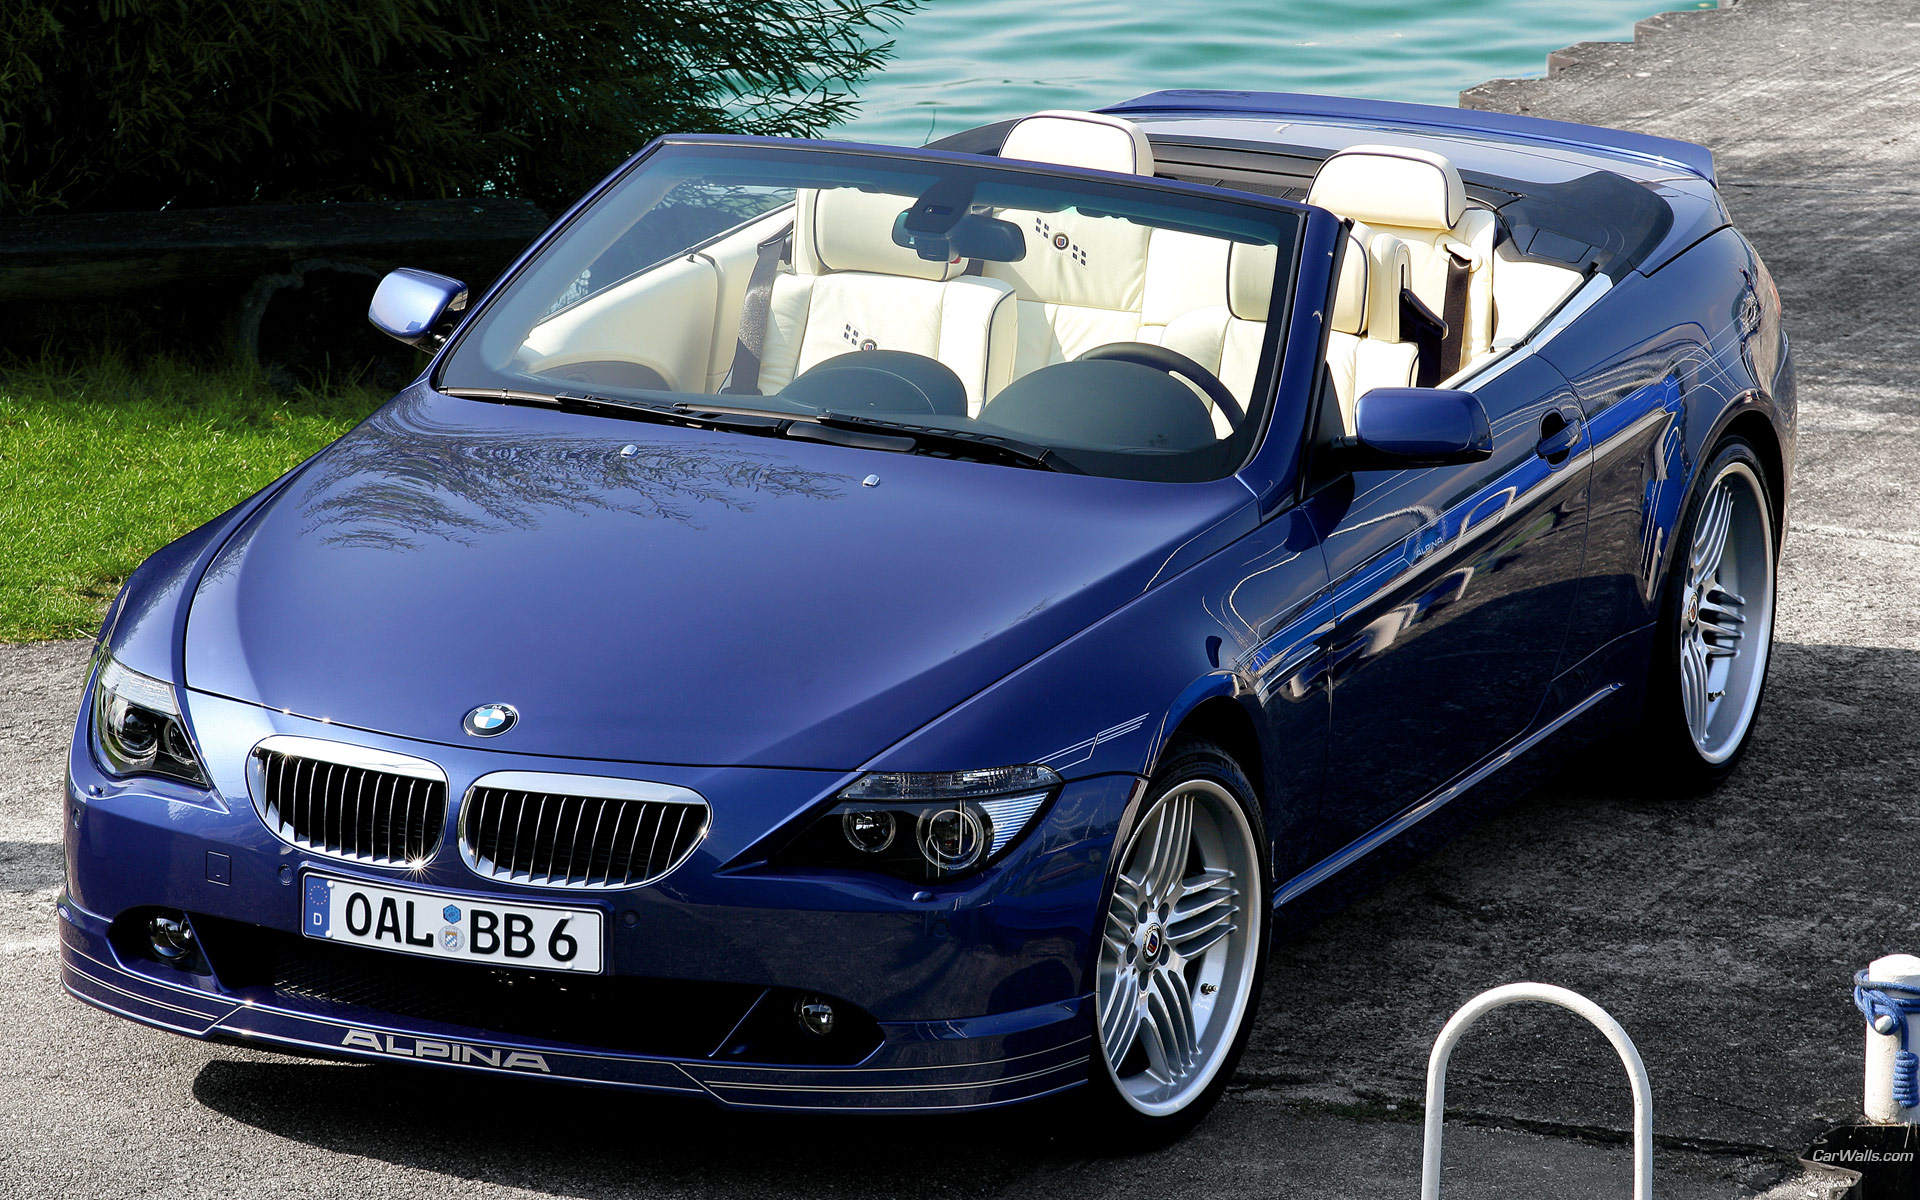 Download full size B6 blue front Bmw wallpaper / 1920x1200